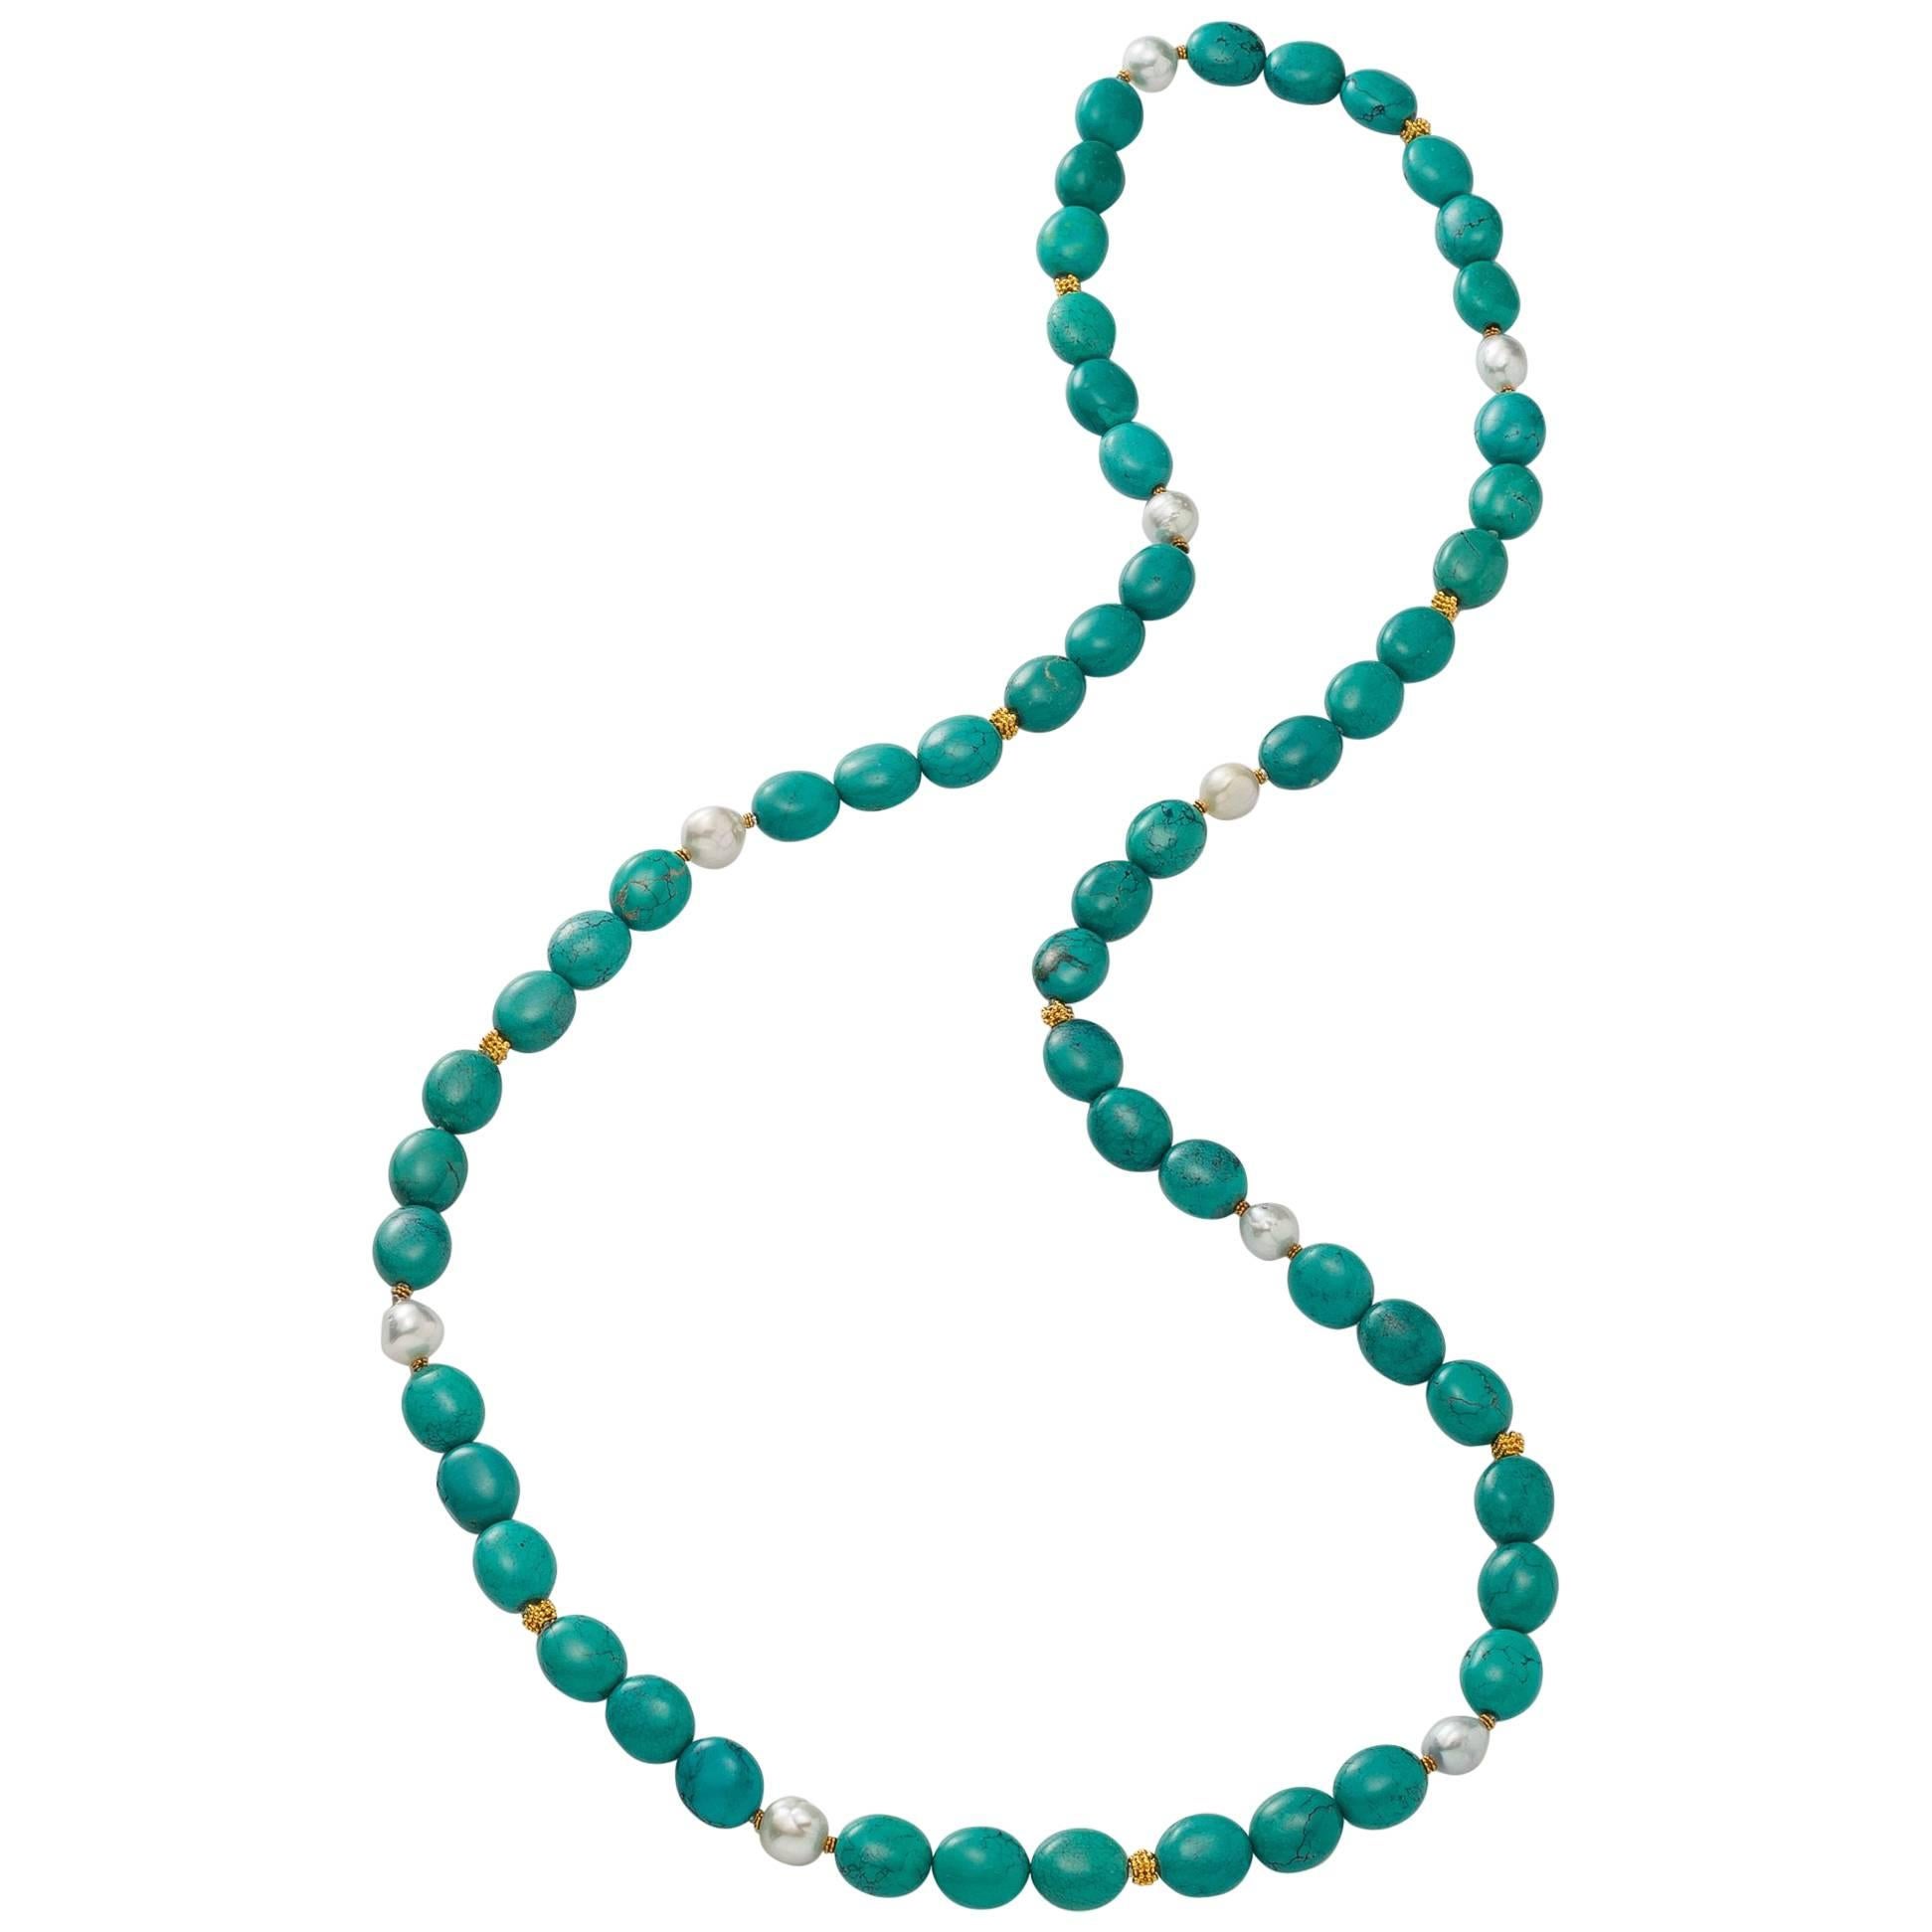 Tibetan Turquoise, South Sea Pearls and 18 Karat Gold Beads Necklace